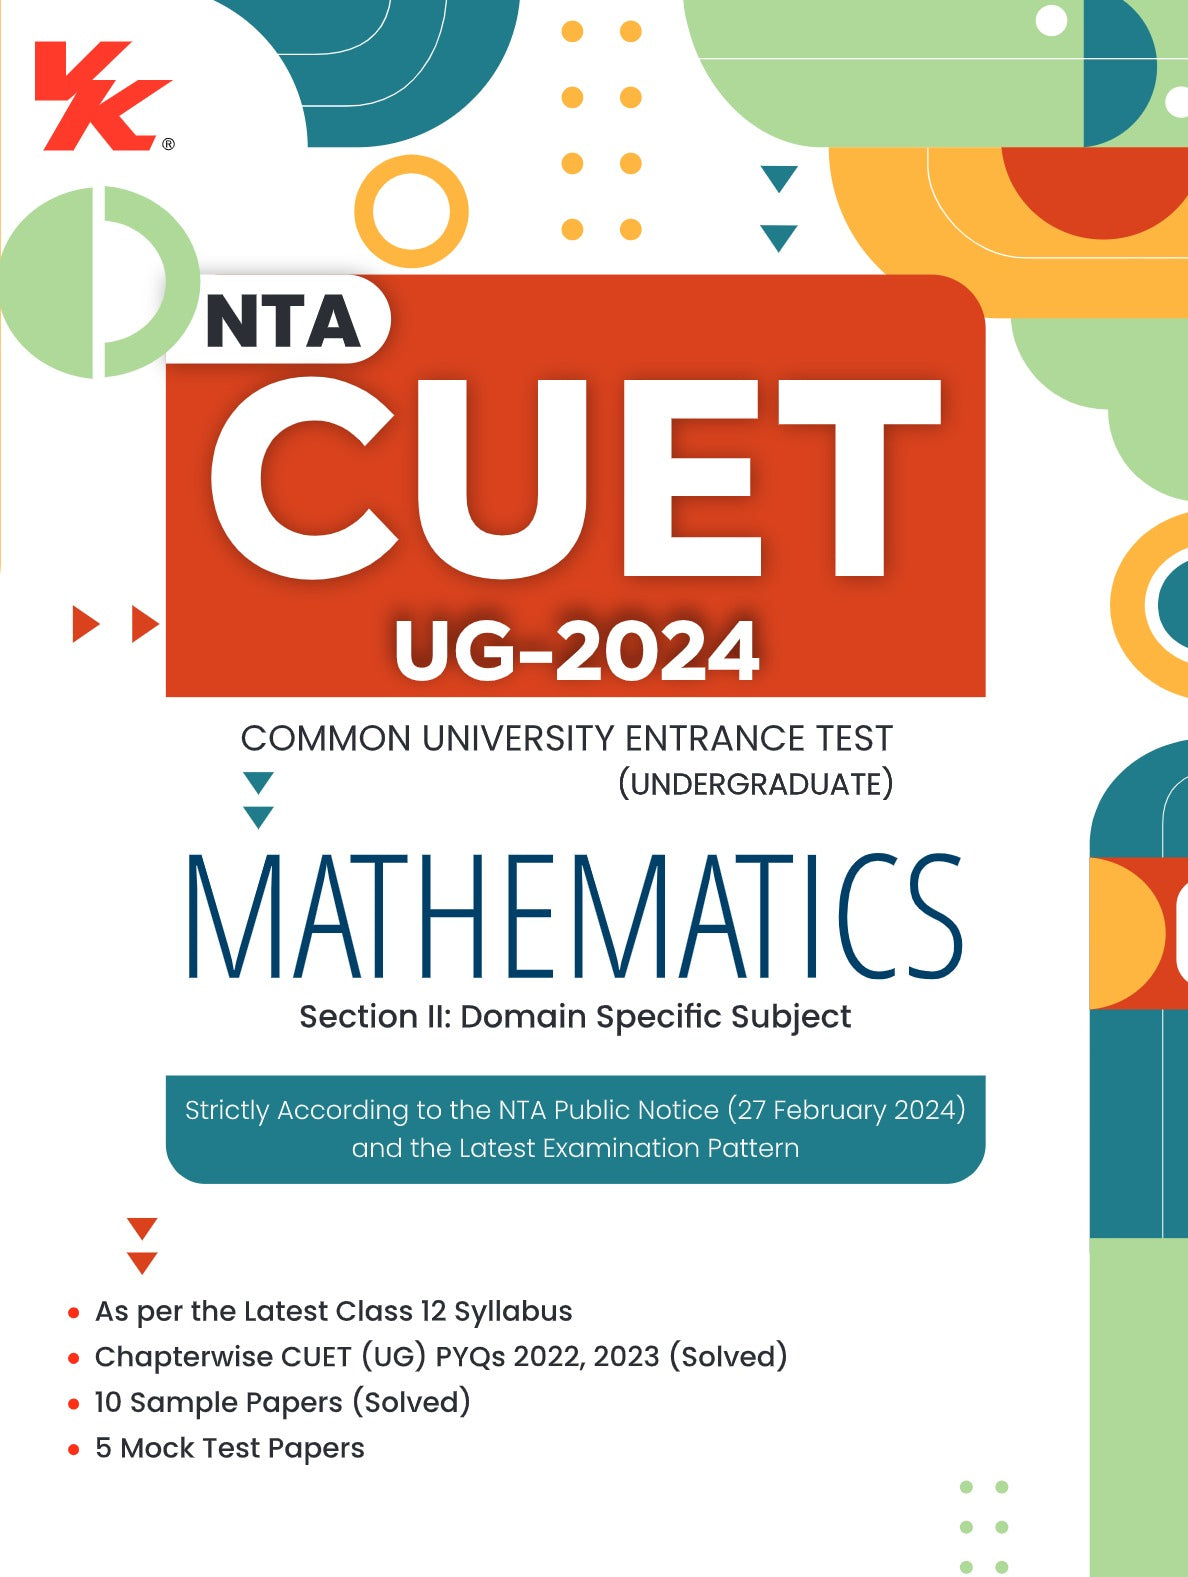 NTA CUET (UG) Mathematics Book | 10 Sample Papers (Solved) | 5 Mock Test Papers | Common University Entrance Test Section II | Including Solved Previous Year Question Papers (2022, 2023 ) | For Entrance Exam Preparation Book 2024